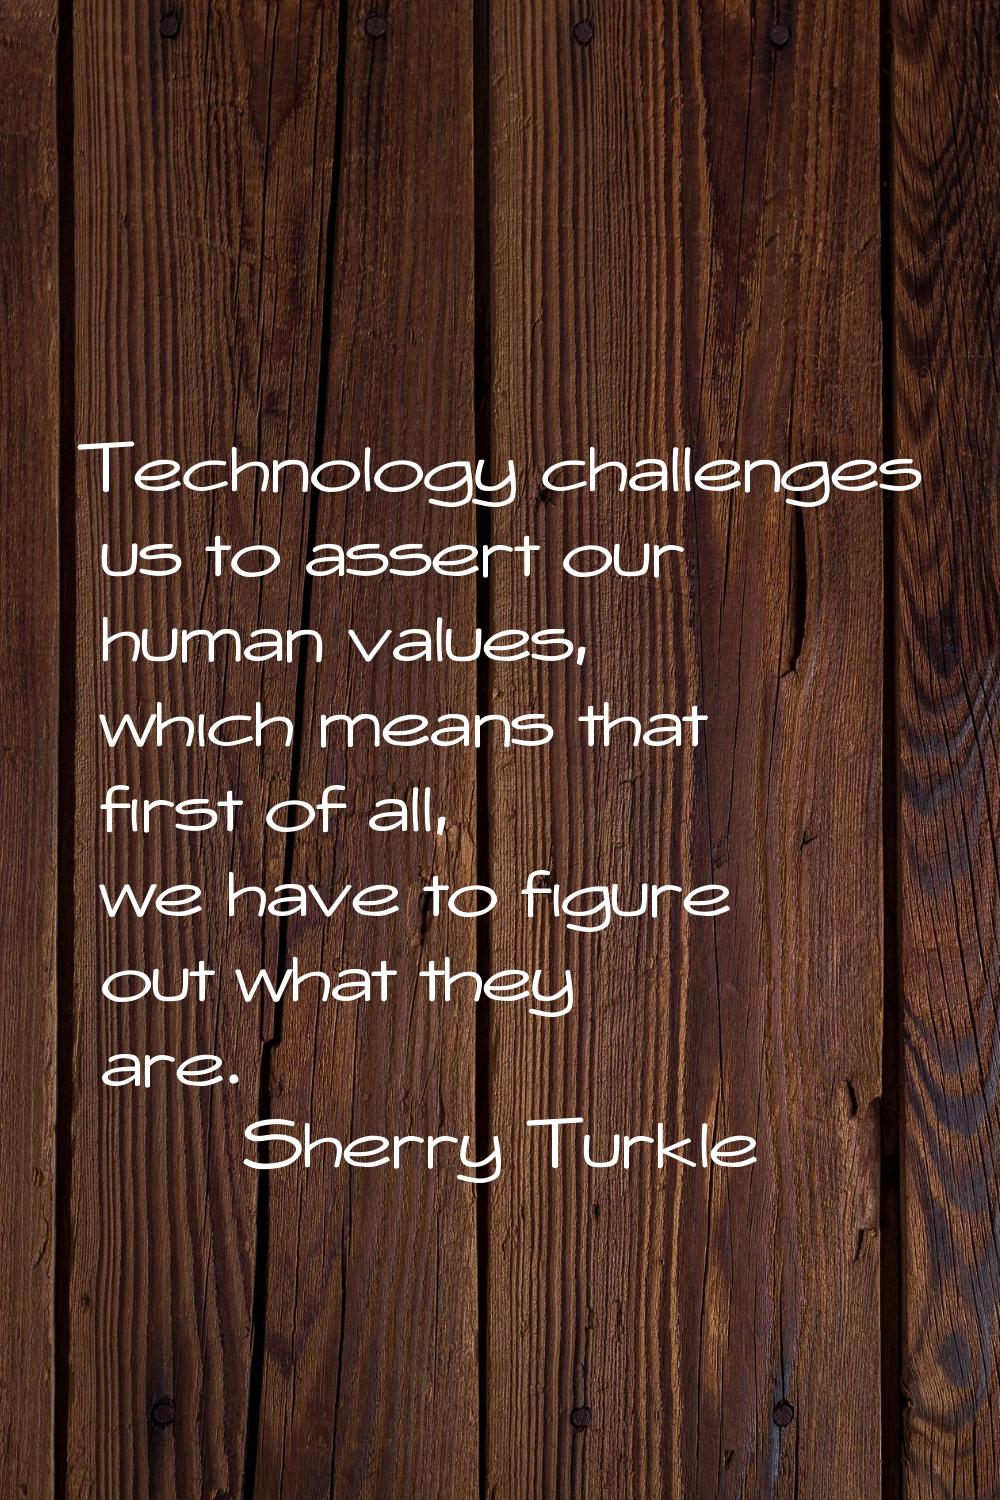 Technology challenges us to assert our human values, which means that first of all, we have to figu